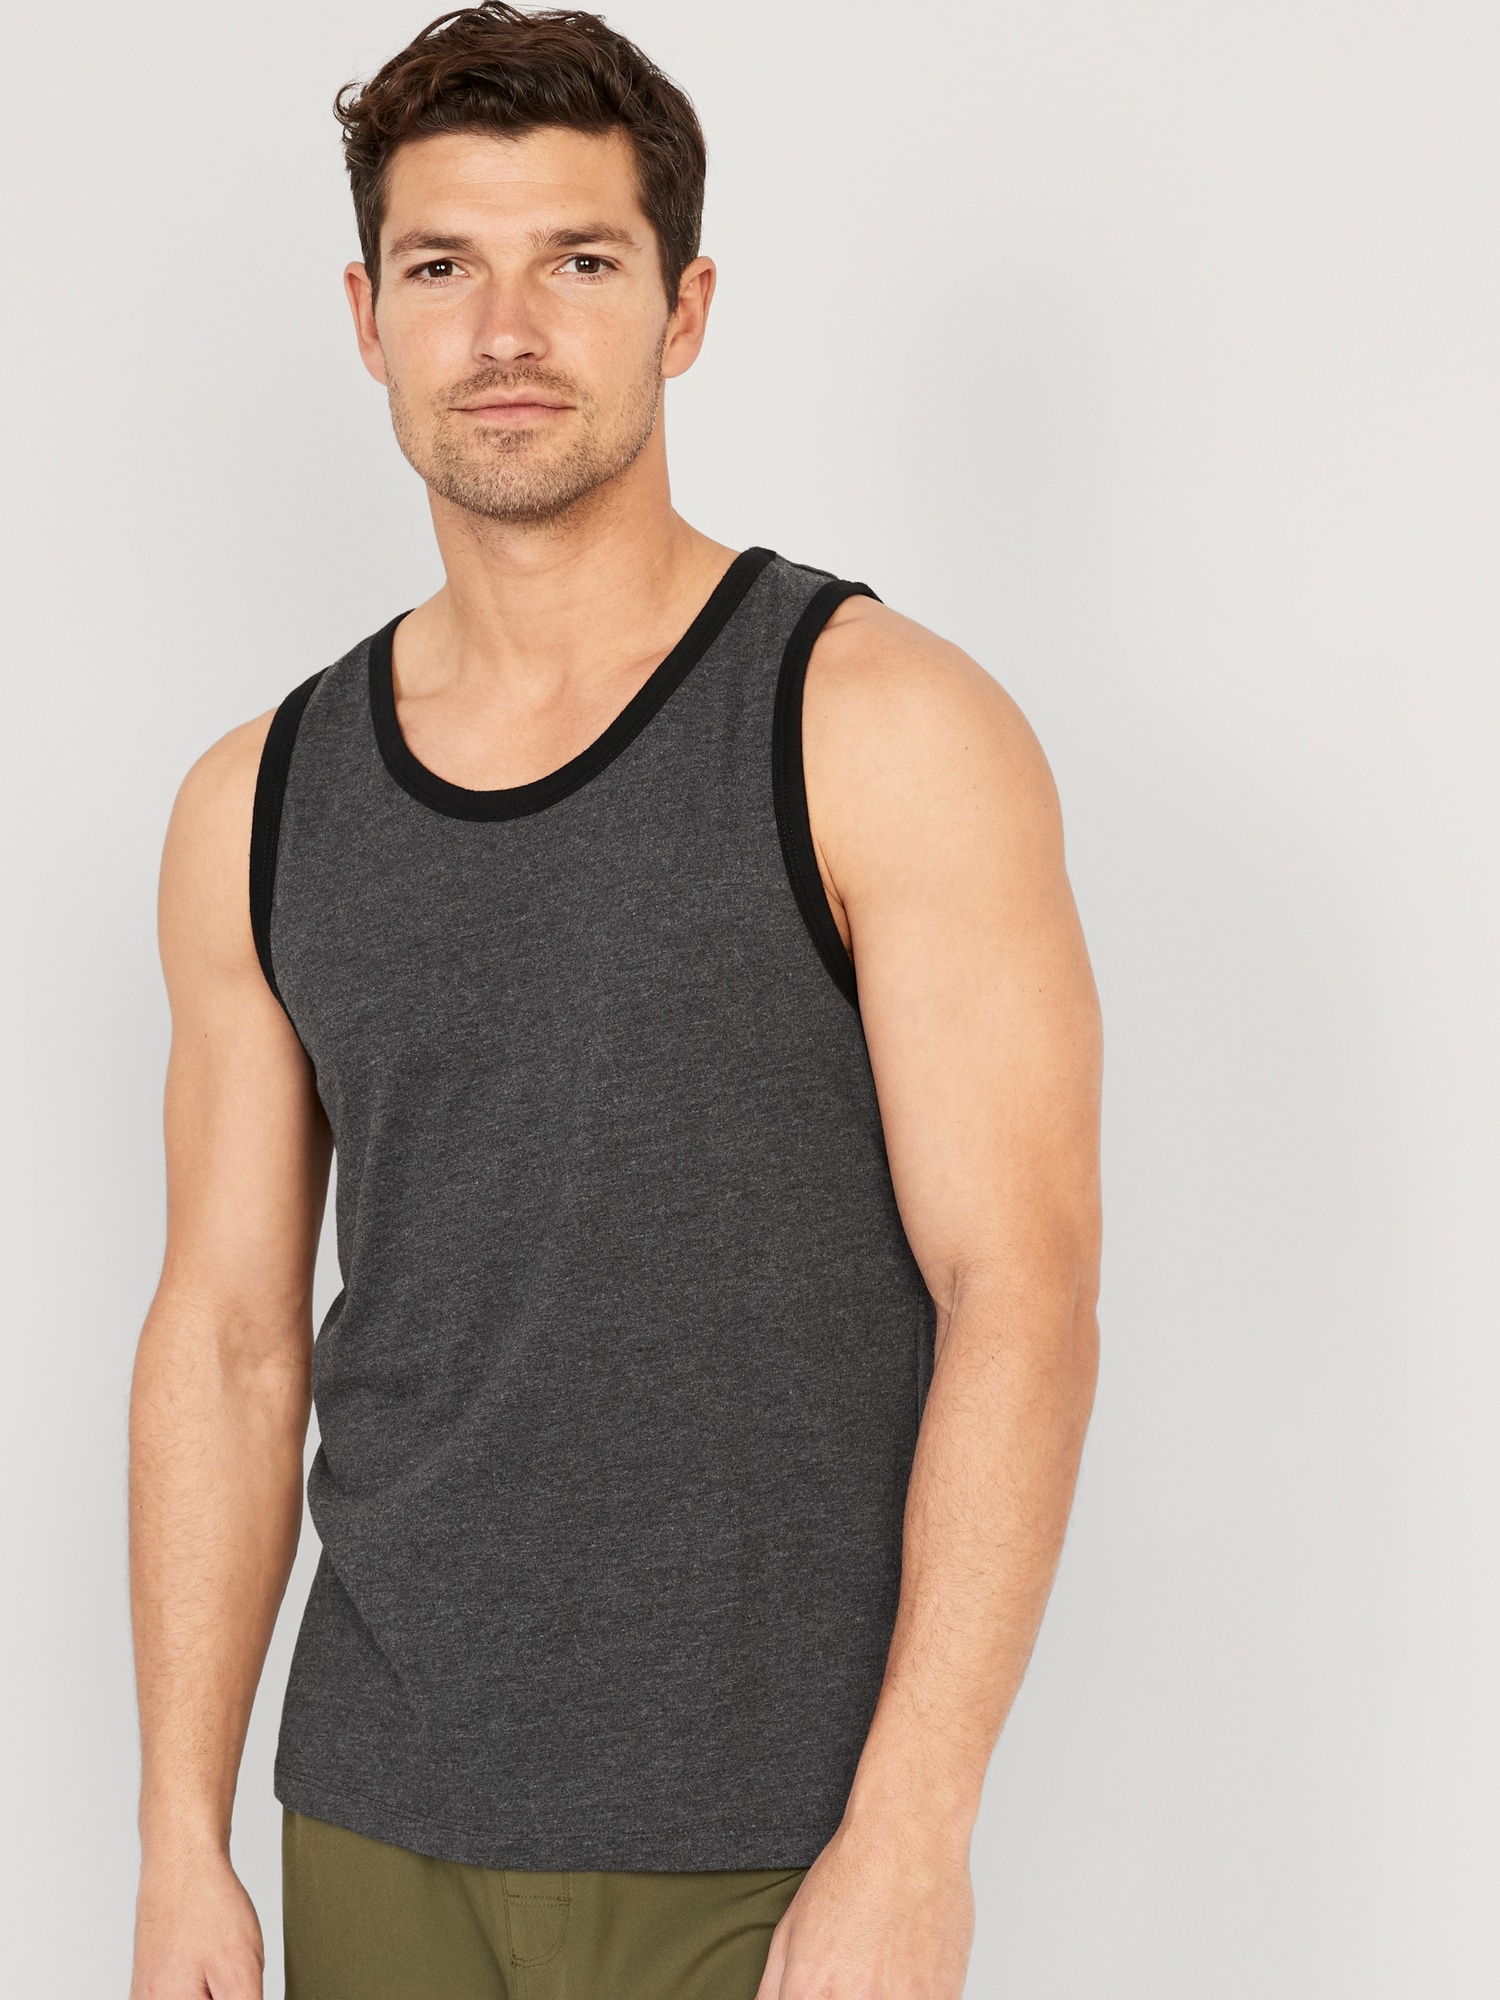 Old Navy Classic Tank Top for Men black. 1